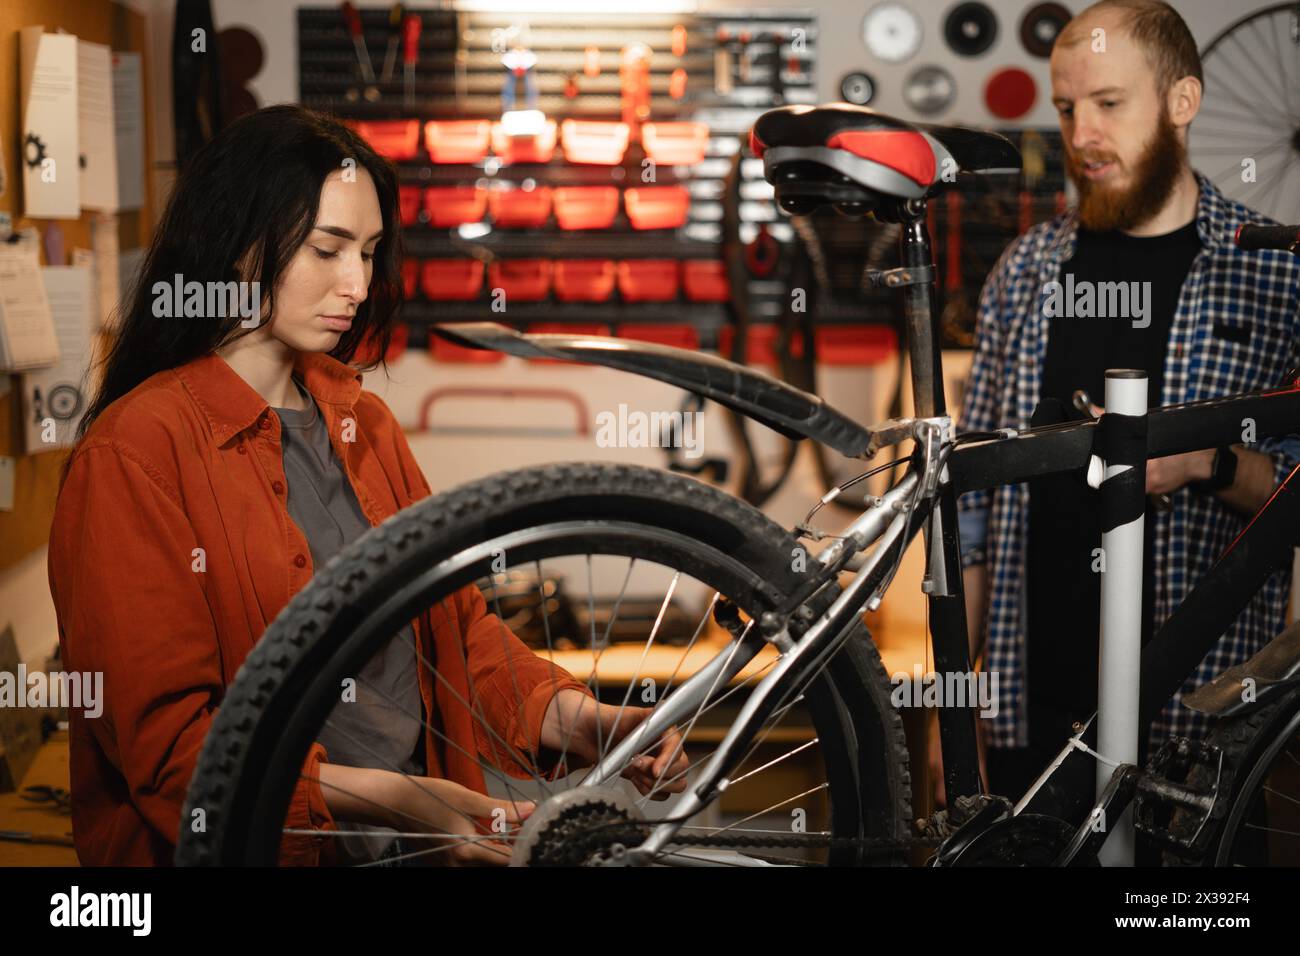 Bike service, repair and upgrade concept. Repairman couple or colleagues fixing bicycle in garage. Stock Photo